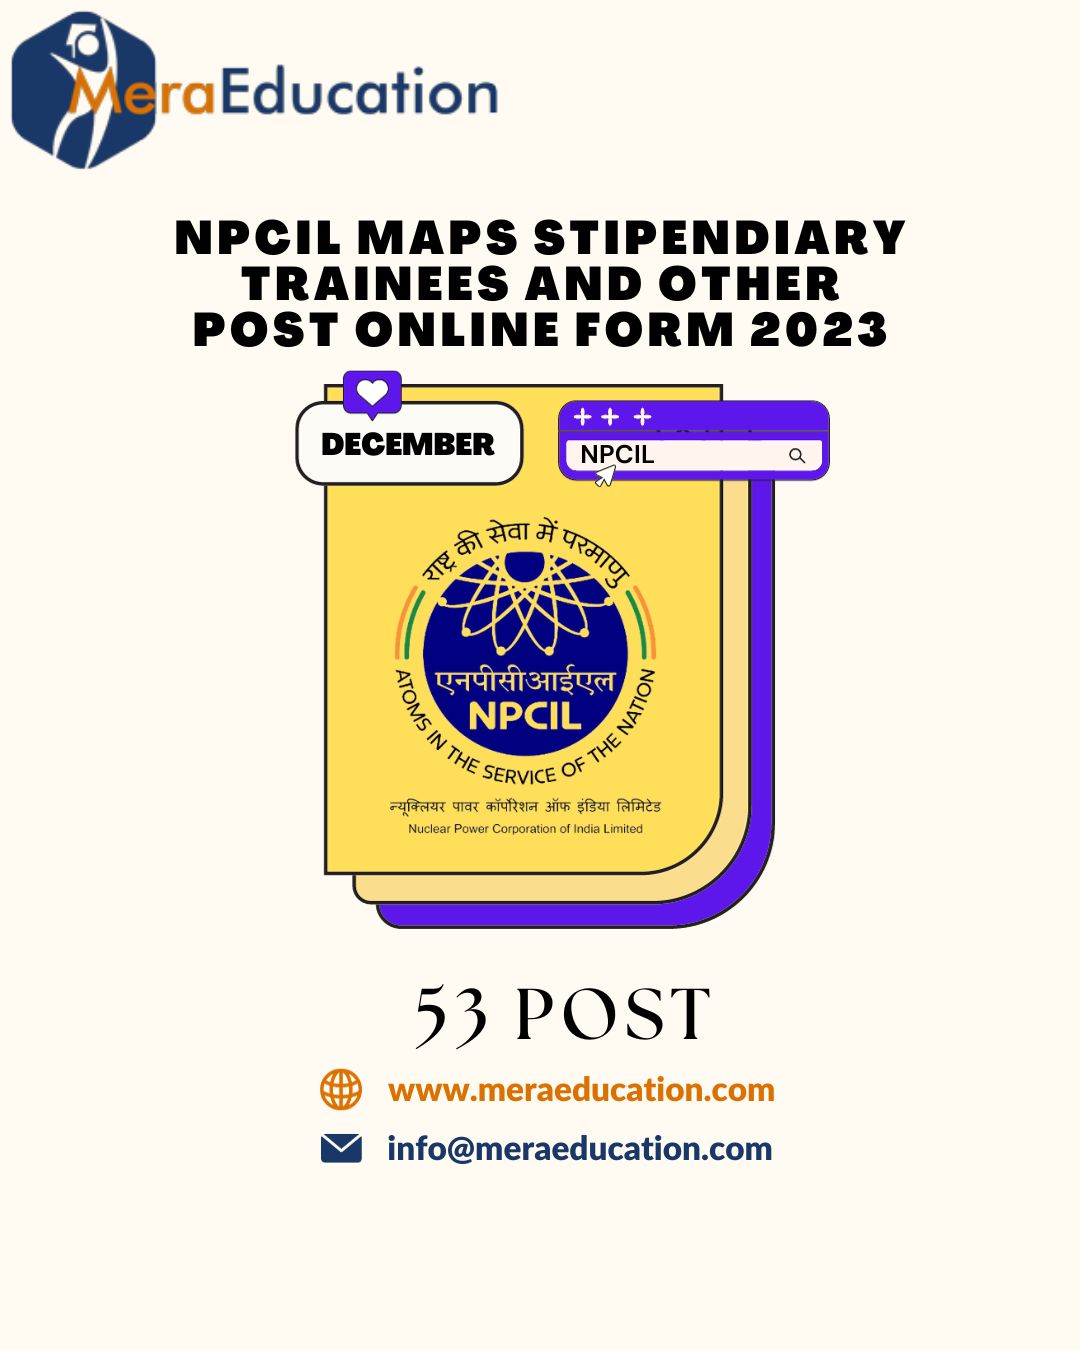 NPCIL MAPS Stipendiary Trainees and Other Post Online Form